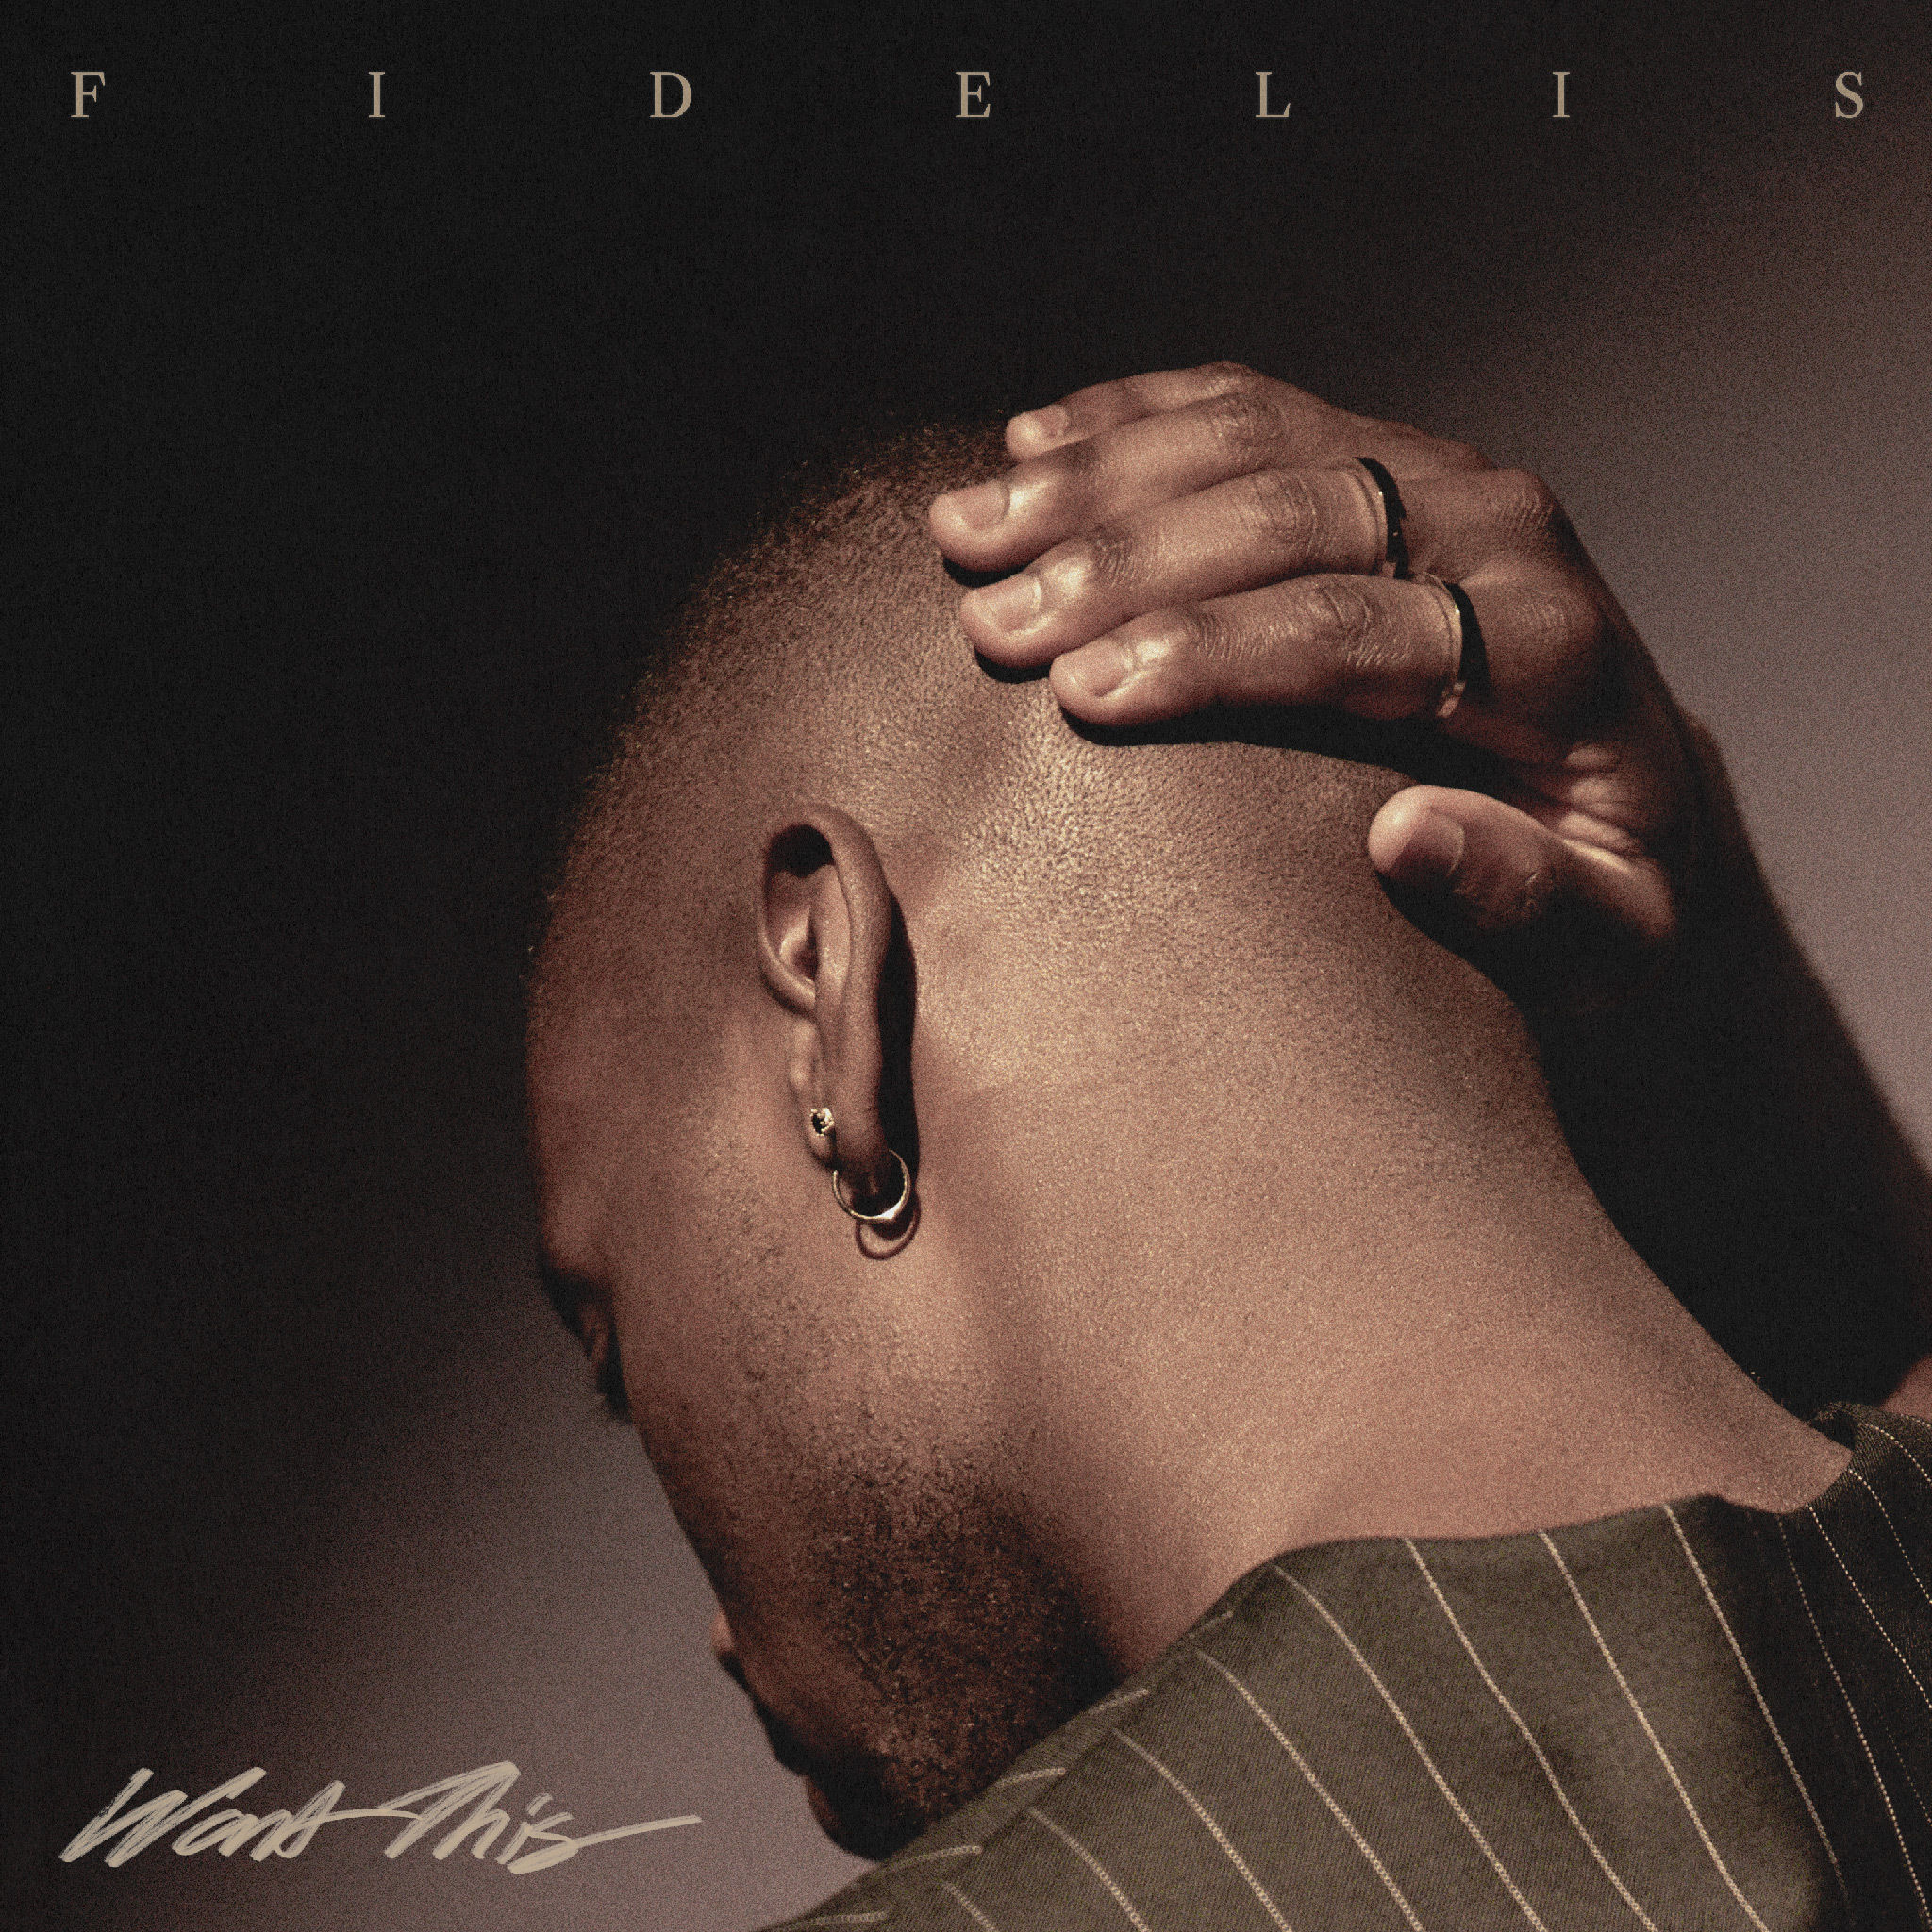 Fidelis Shines On His Emotional Debut Single “Want This”